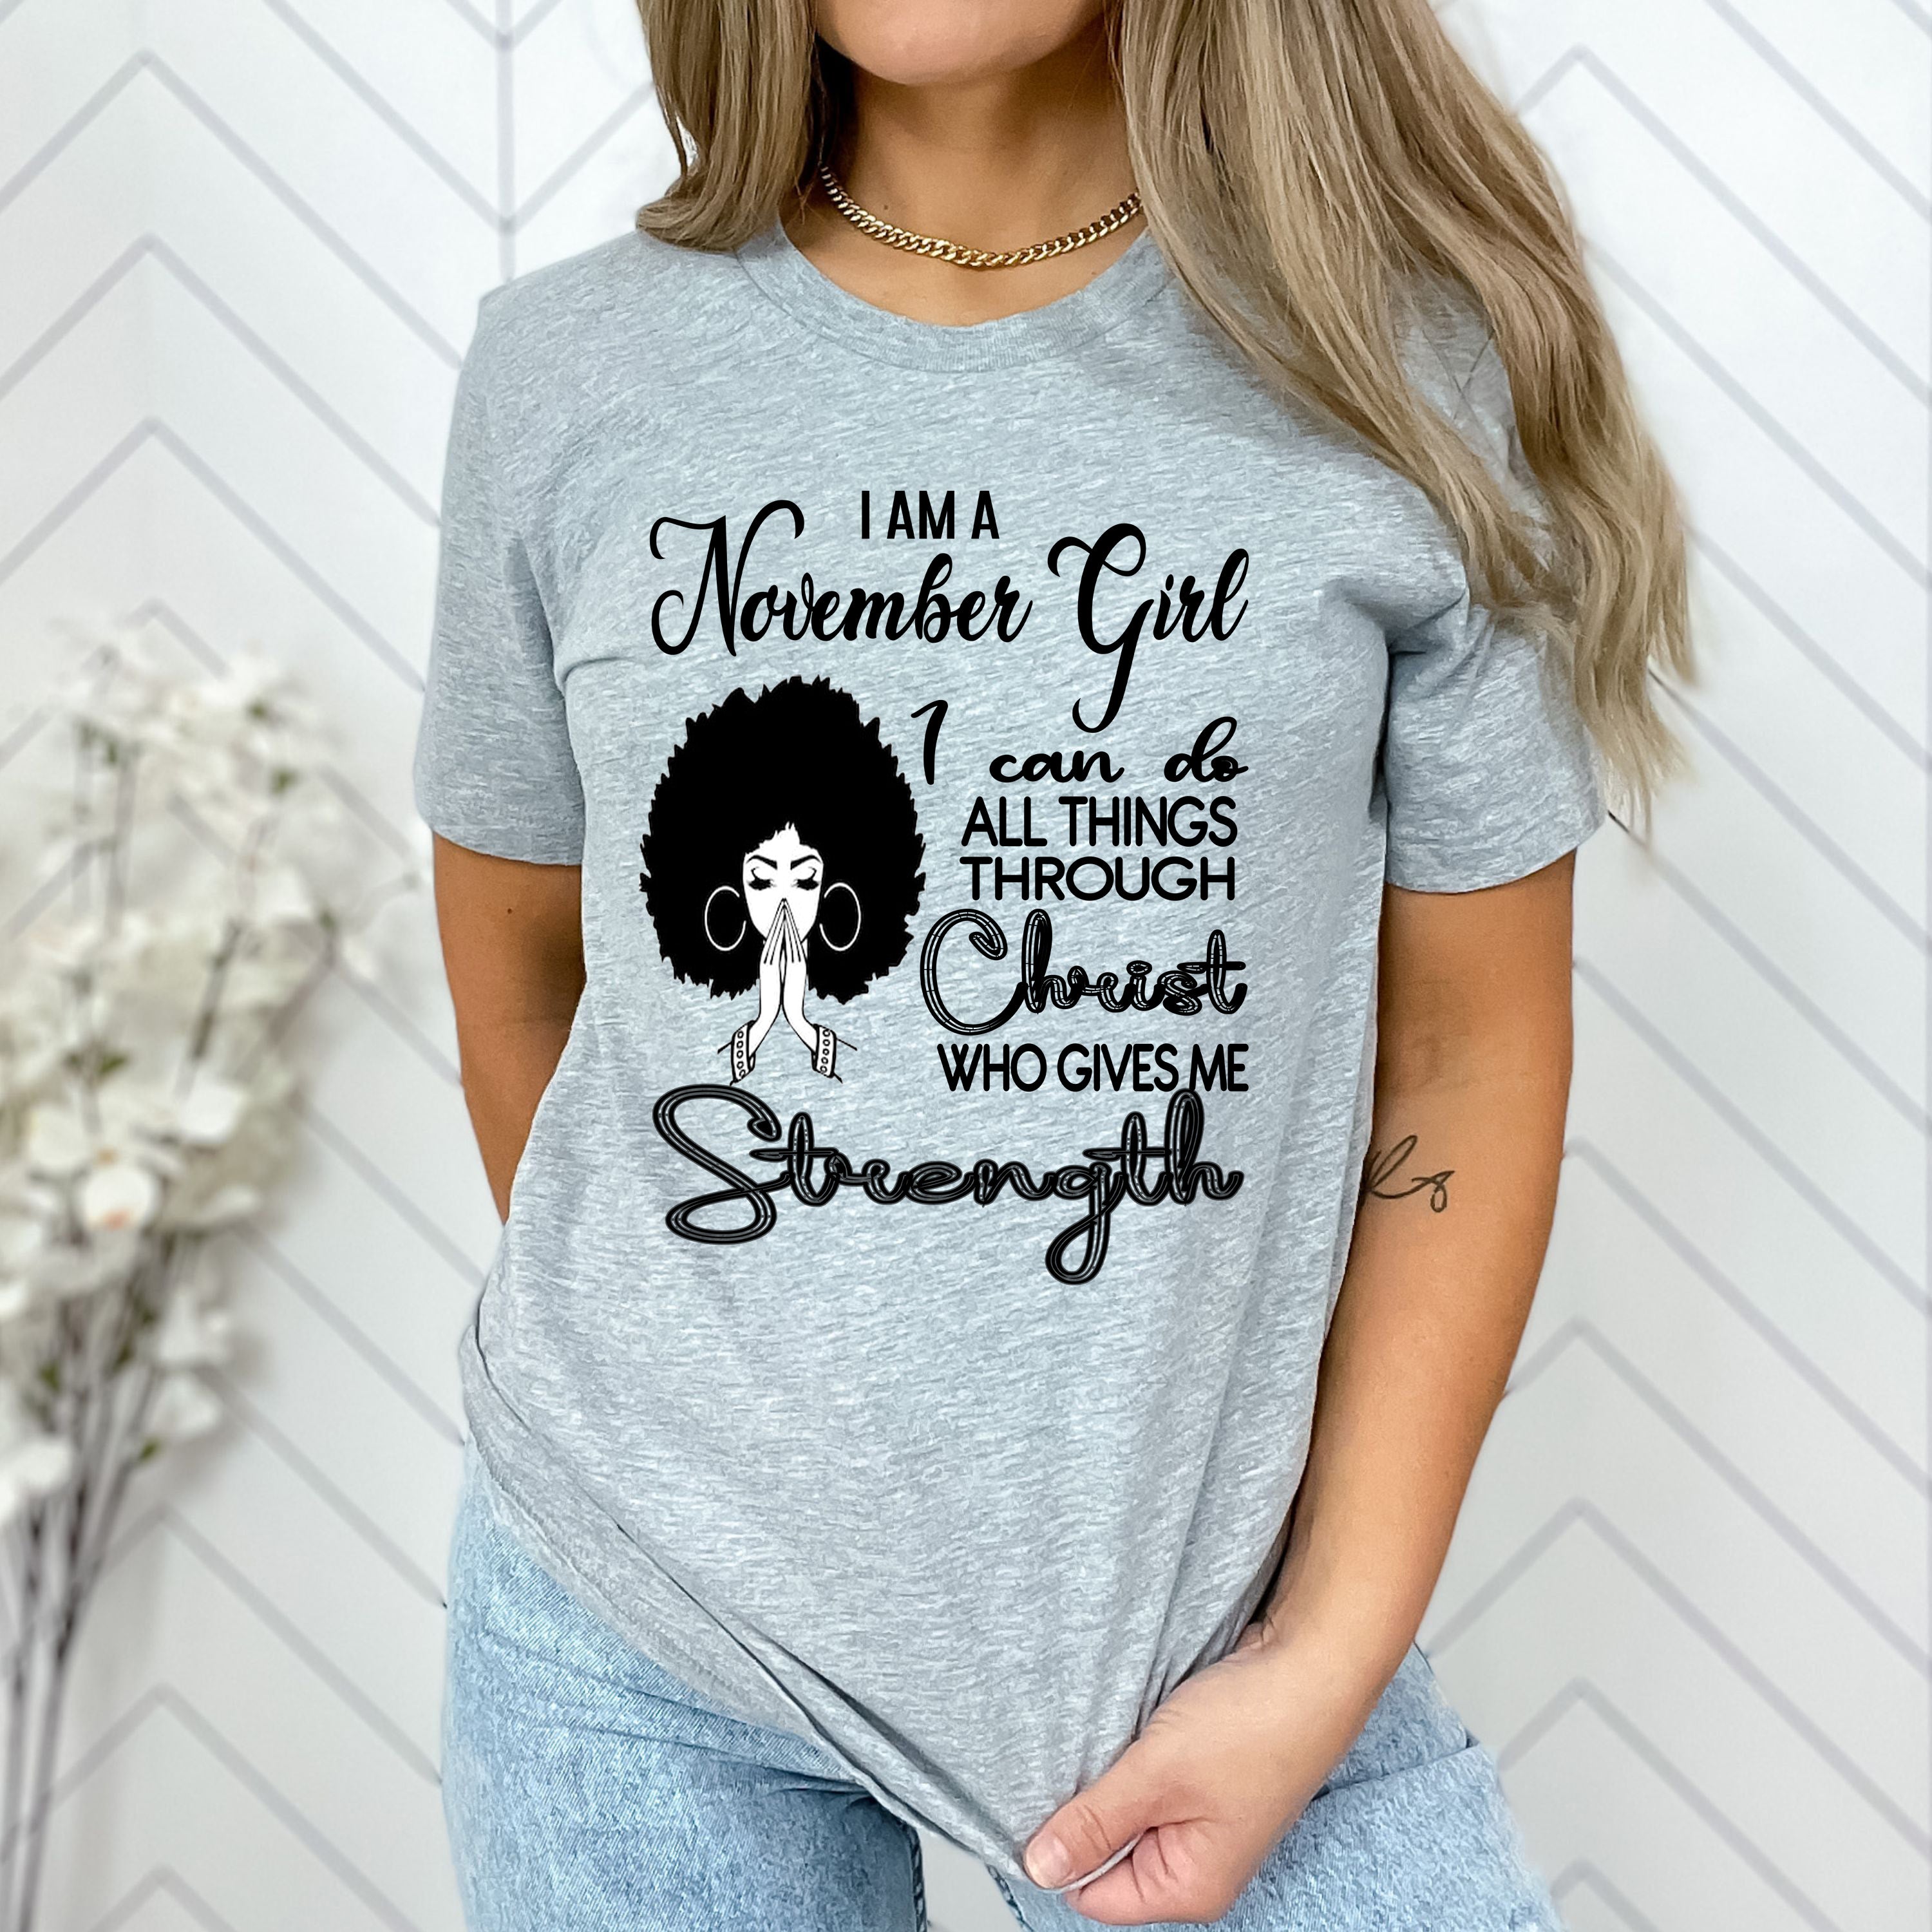 "NOVEMBER GIRL Can Do All Things Through Christ Who Gives Me Strength",T-Shirt.